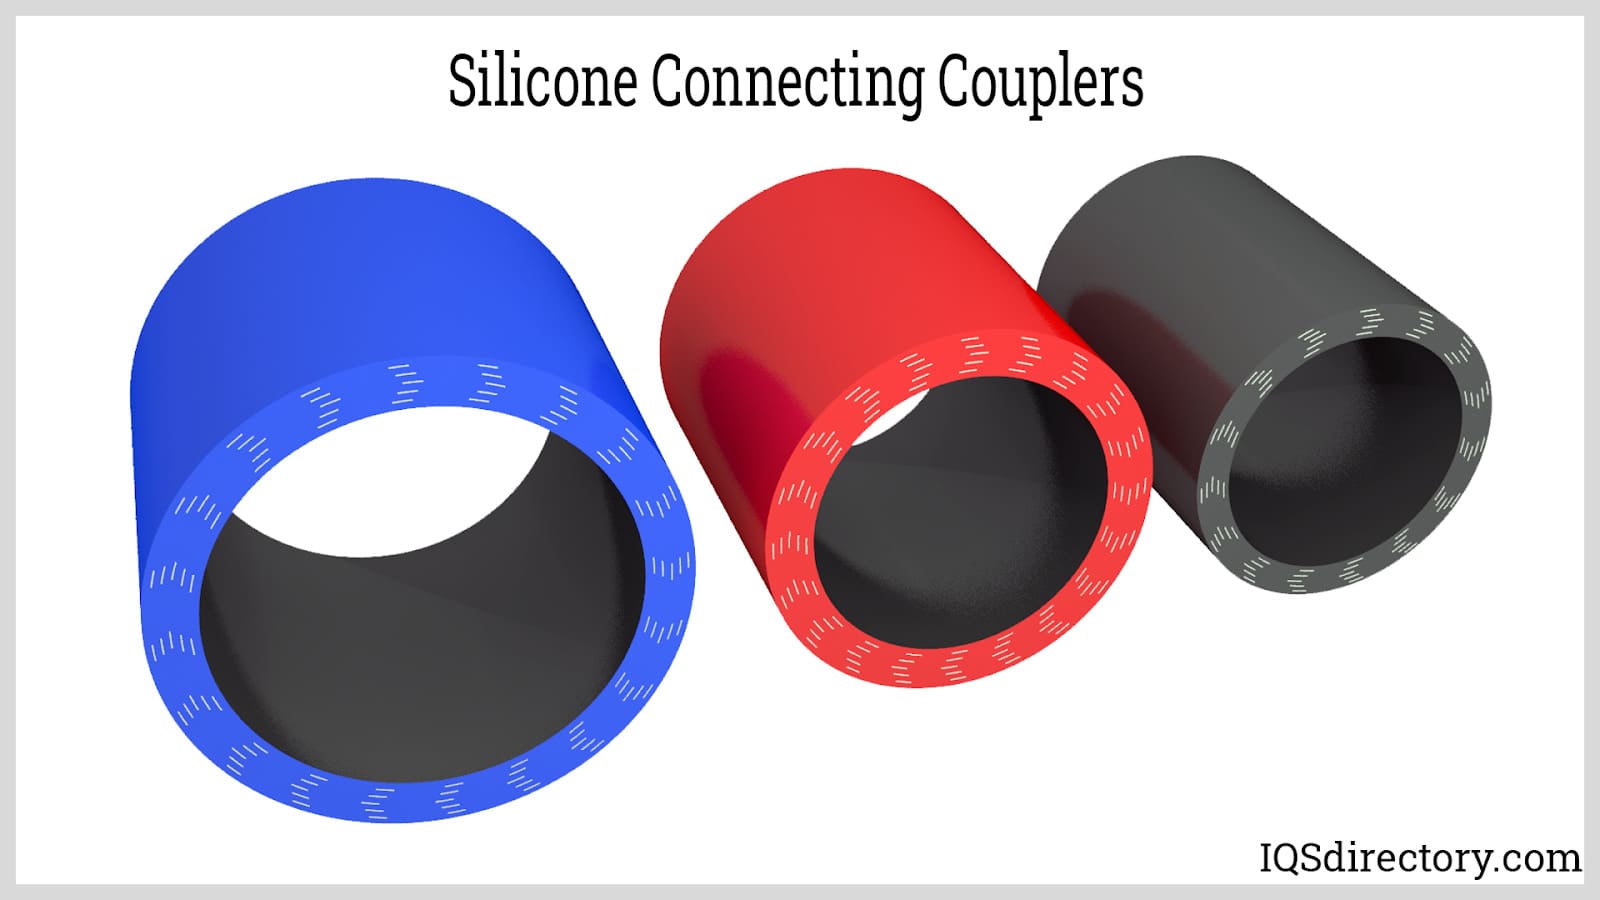 Silicone Connecting Couplers